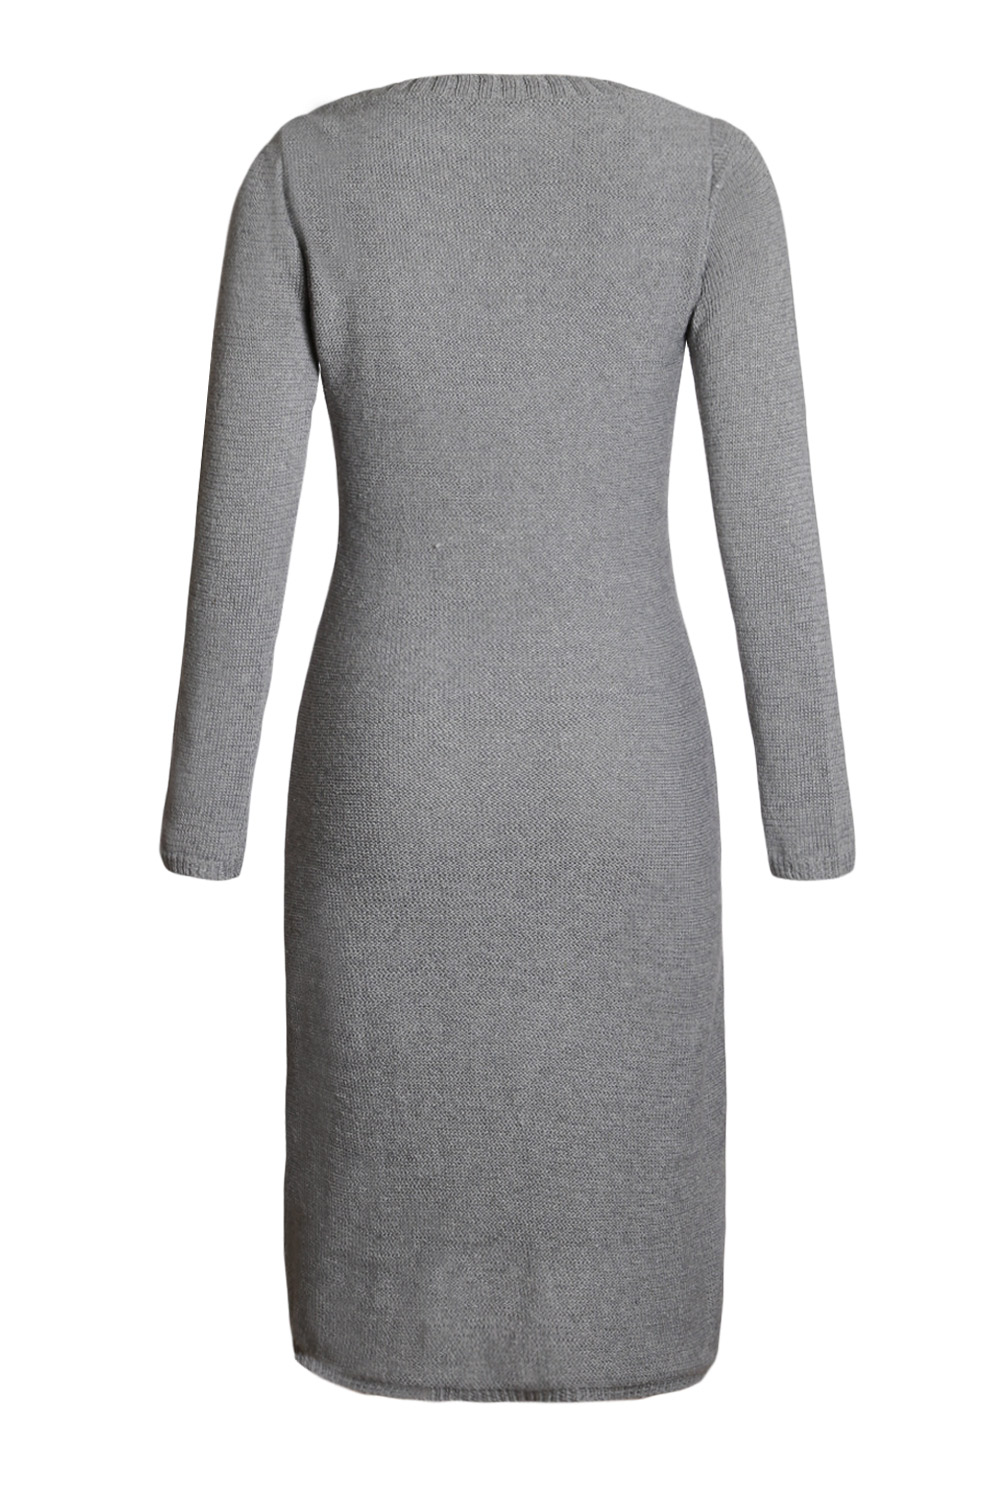 BY27772-11 Gray Women’s Hand Knitted Sweater Dress